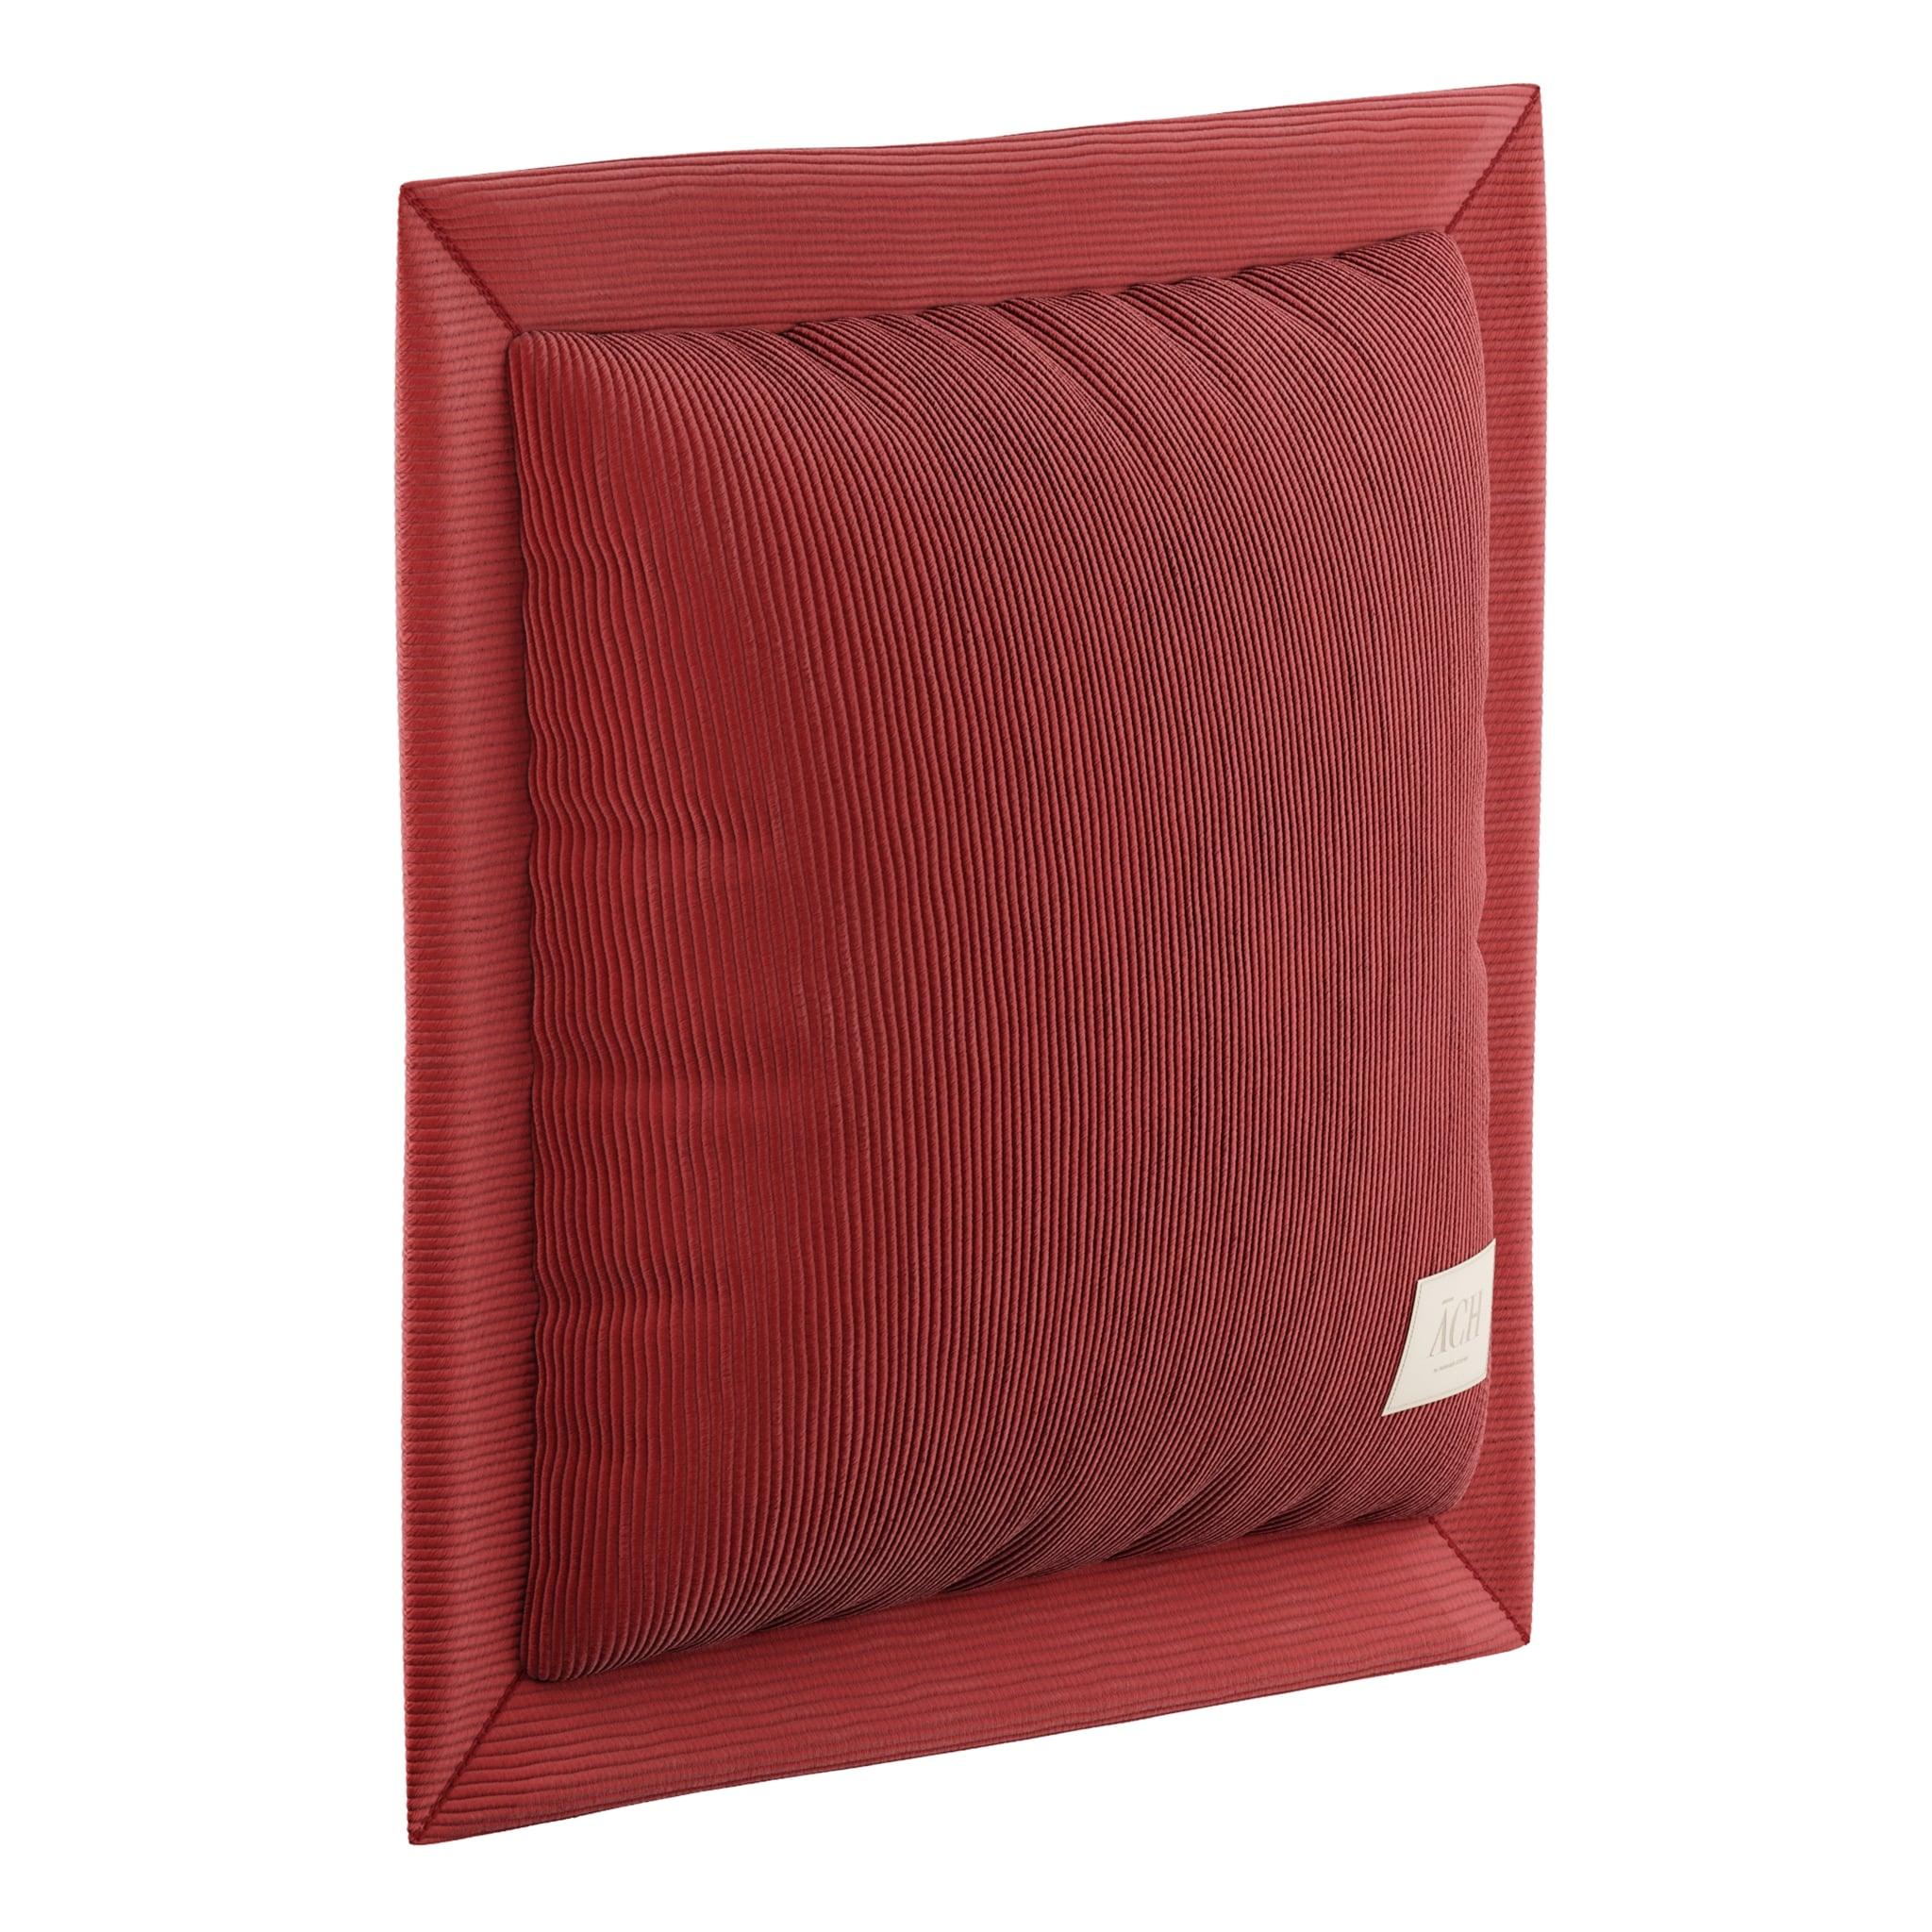 Red Corduroy decorative throw pillow, Mid-Century Modern red cushion 39